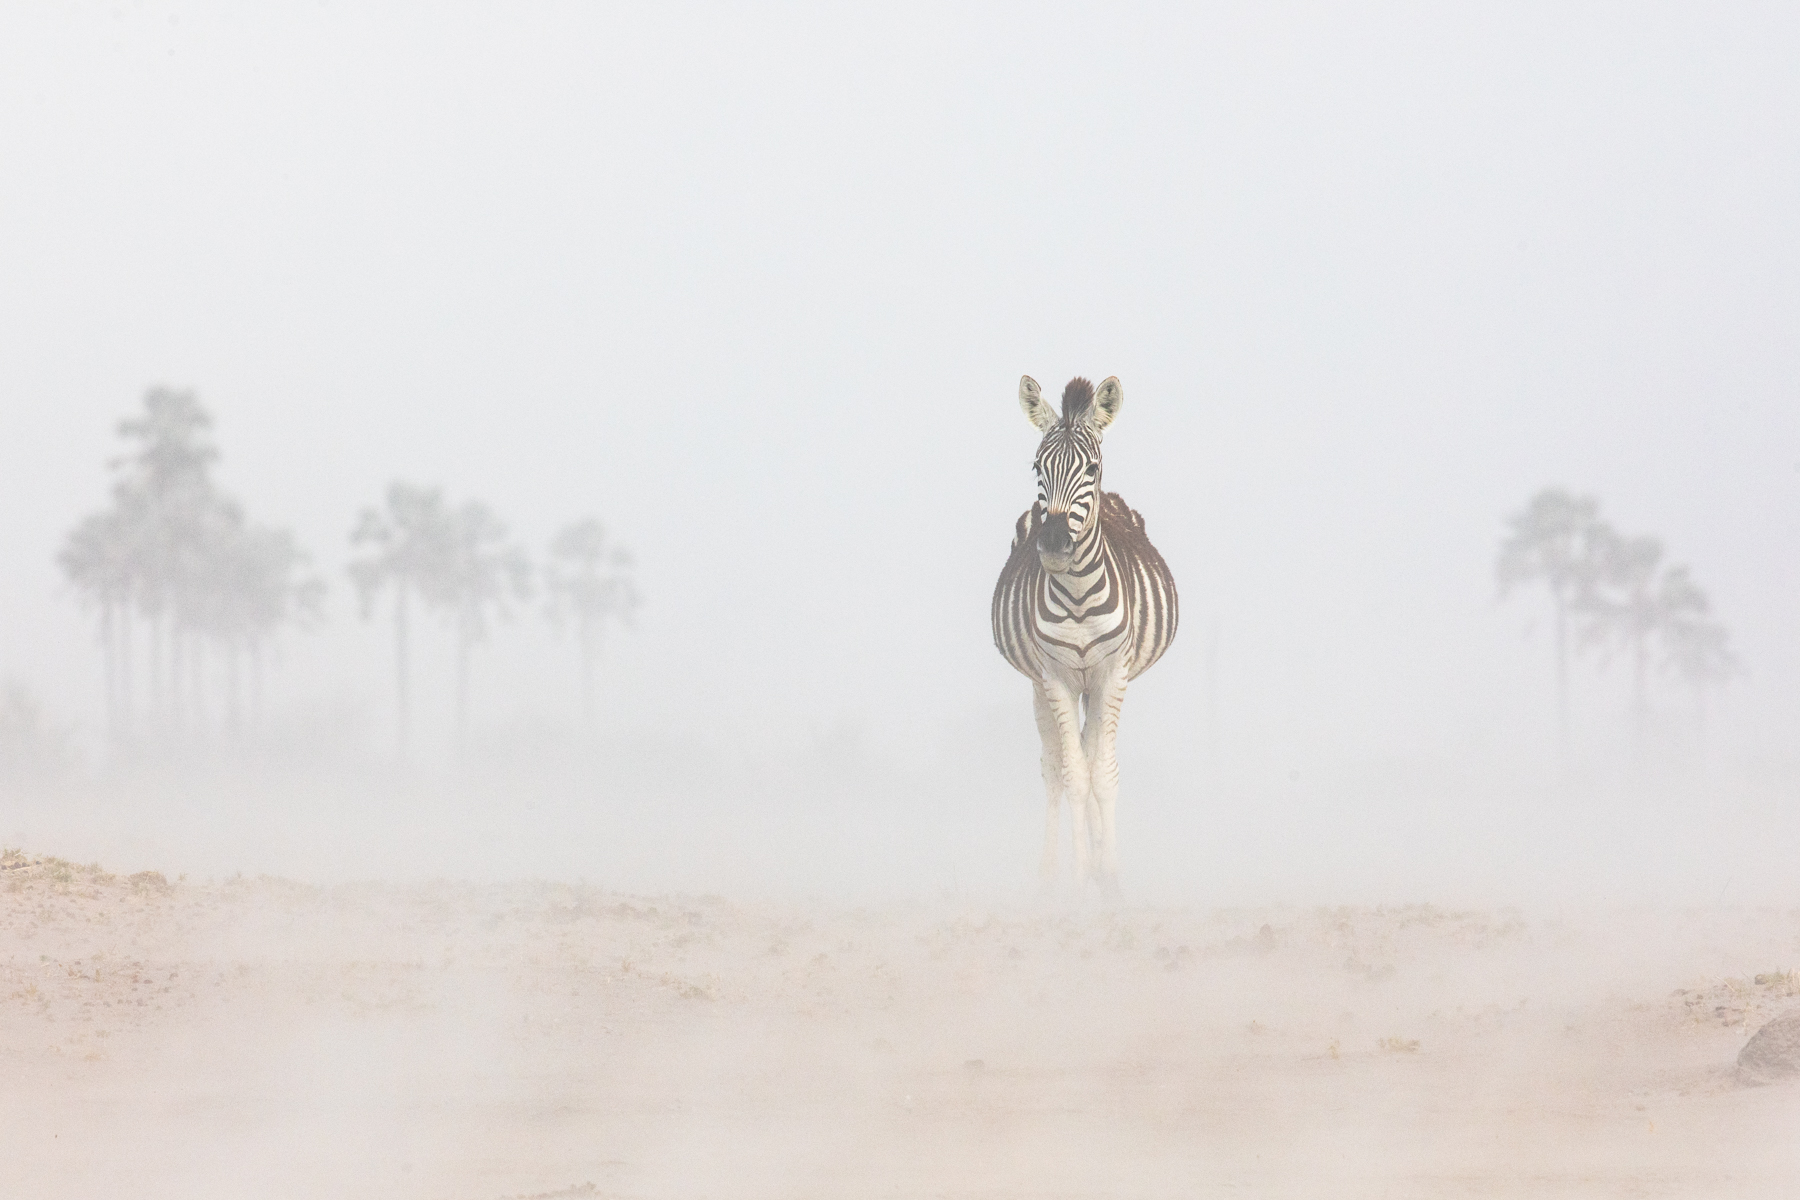 Common Zebra in a dust storm